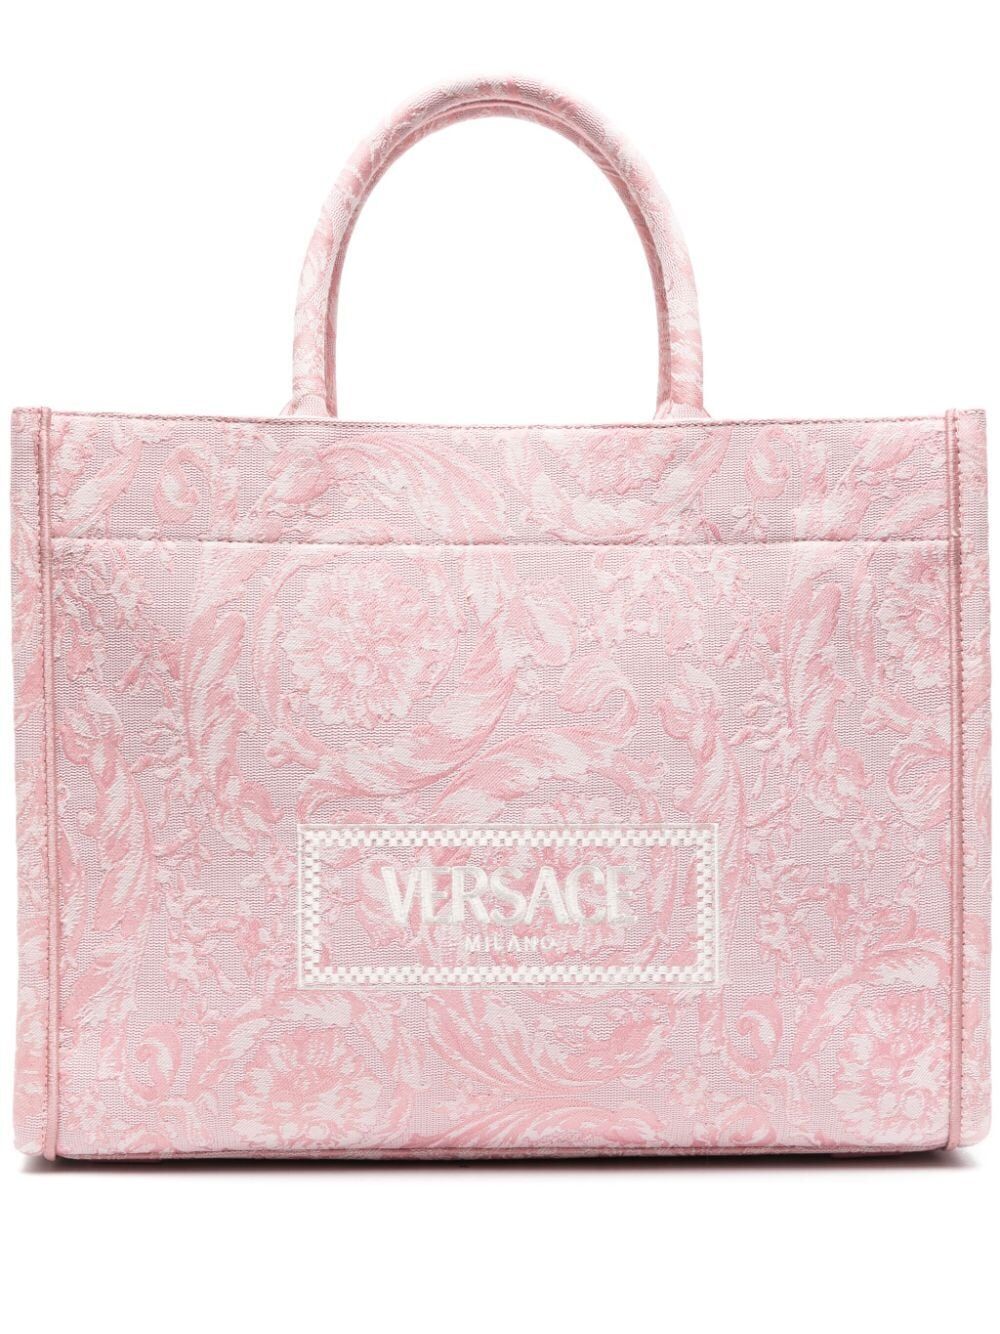 Versace Large Barocco Jacquard Tote Bag In Pink & Purple